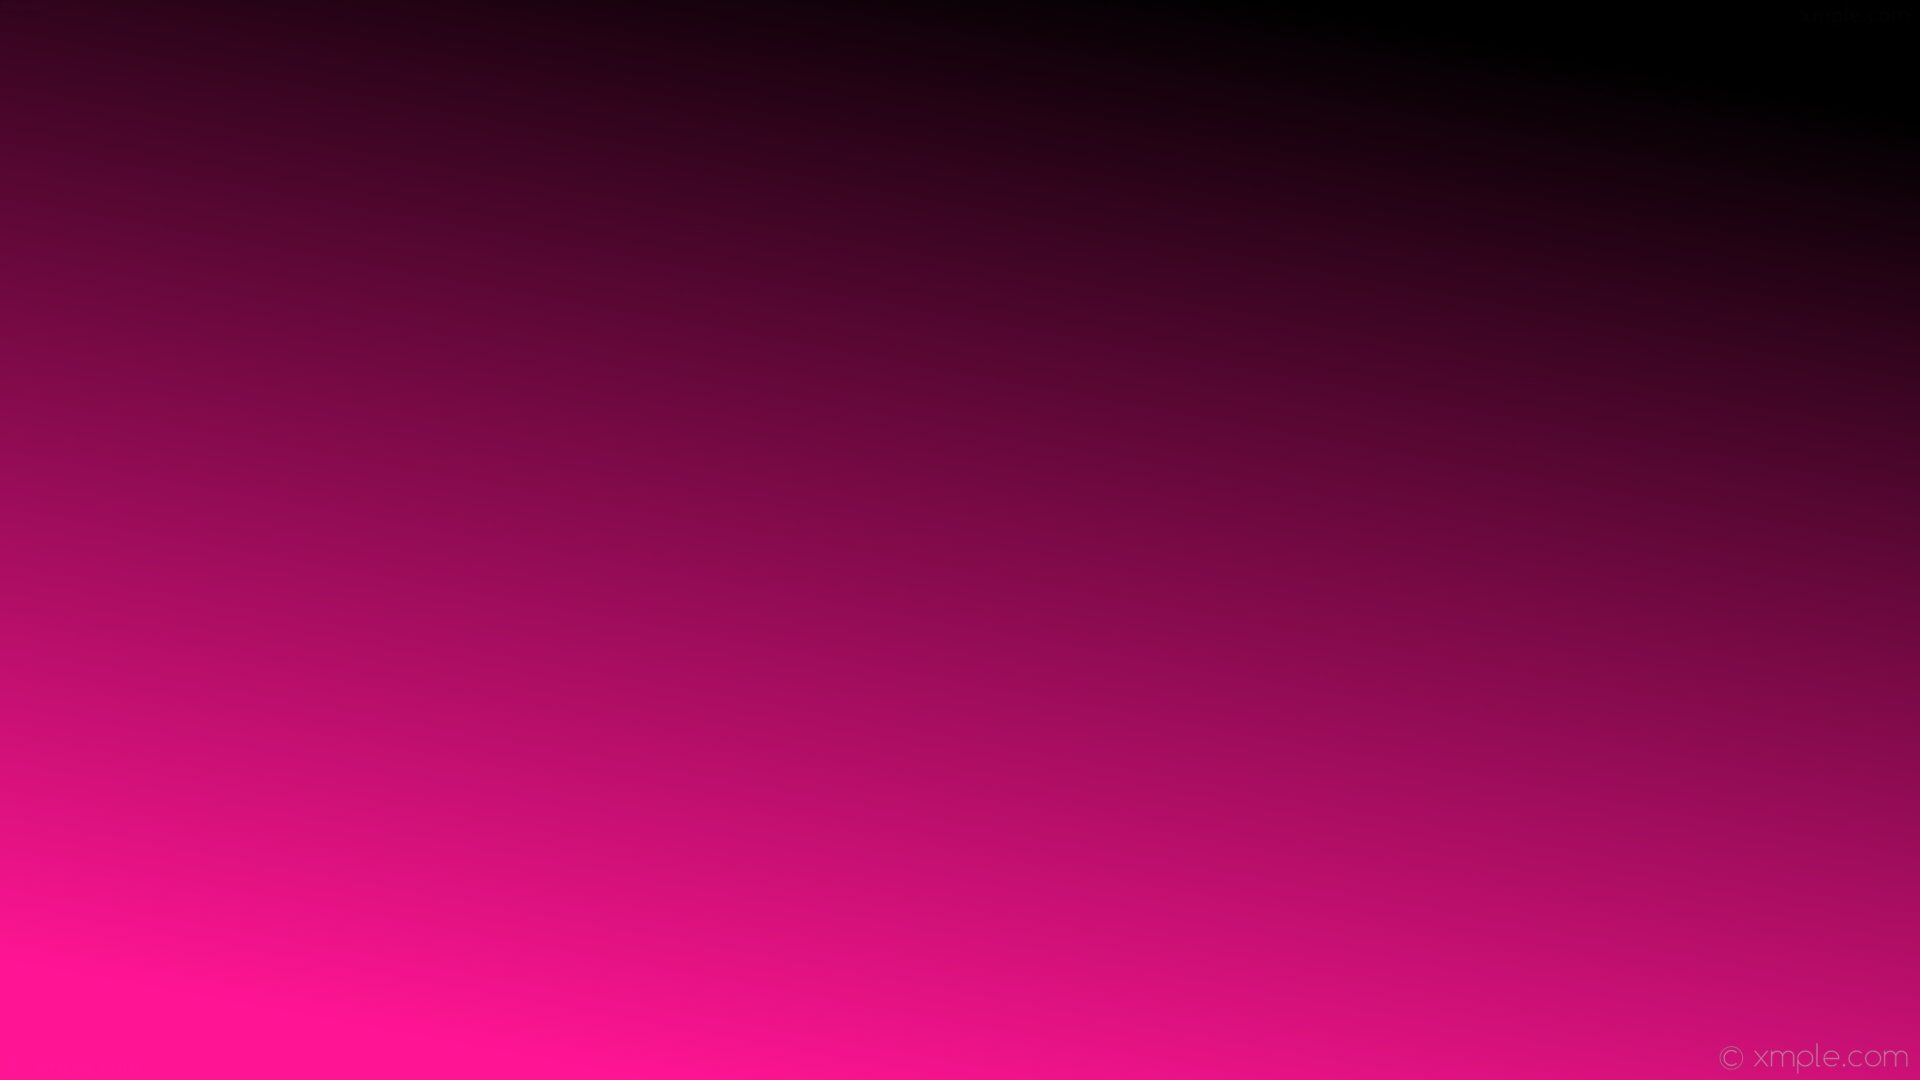 A pink and black gradient background with a black border.